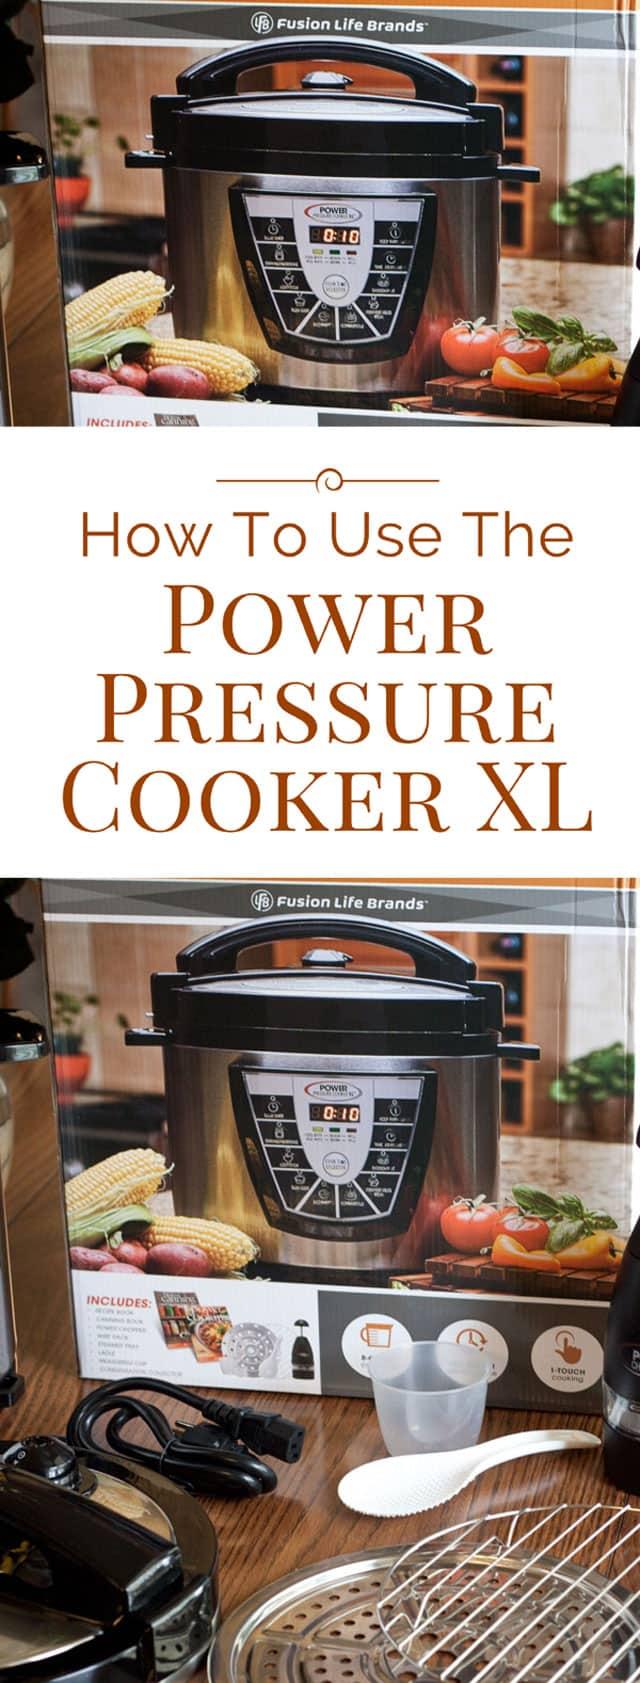 The Power Pressure Cooker XL is one of the best selling electric pressure cookers. Here